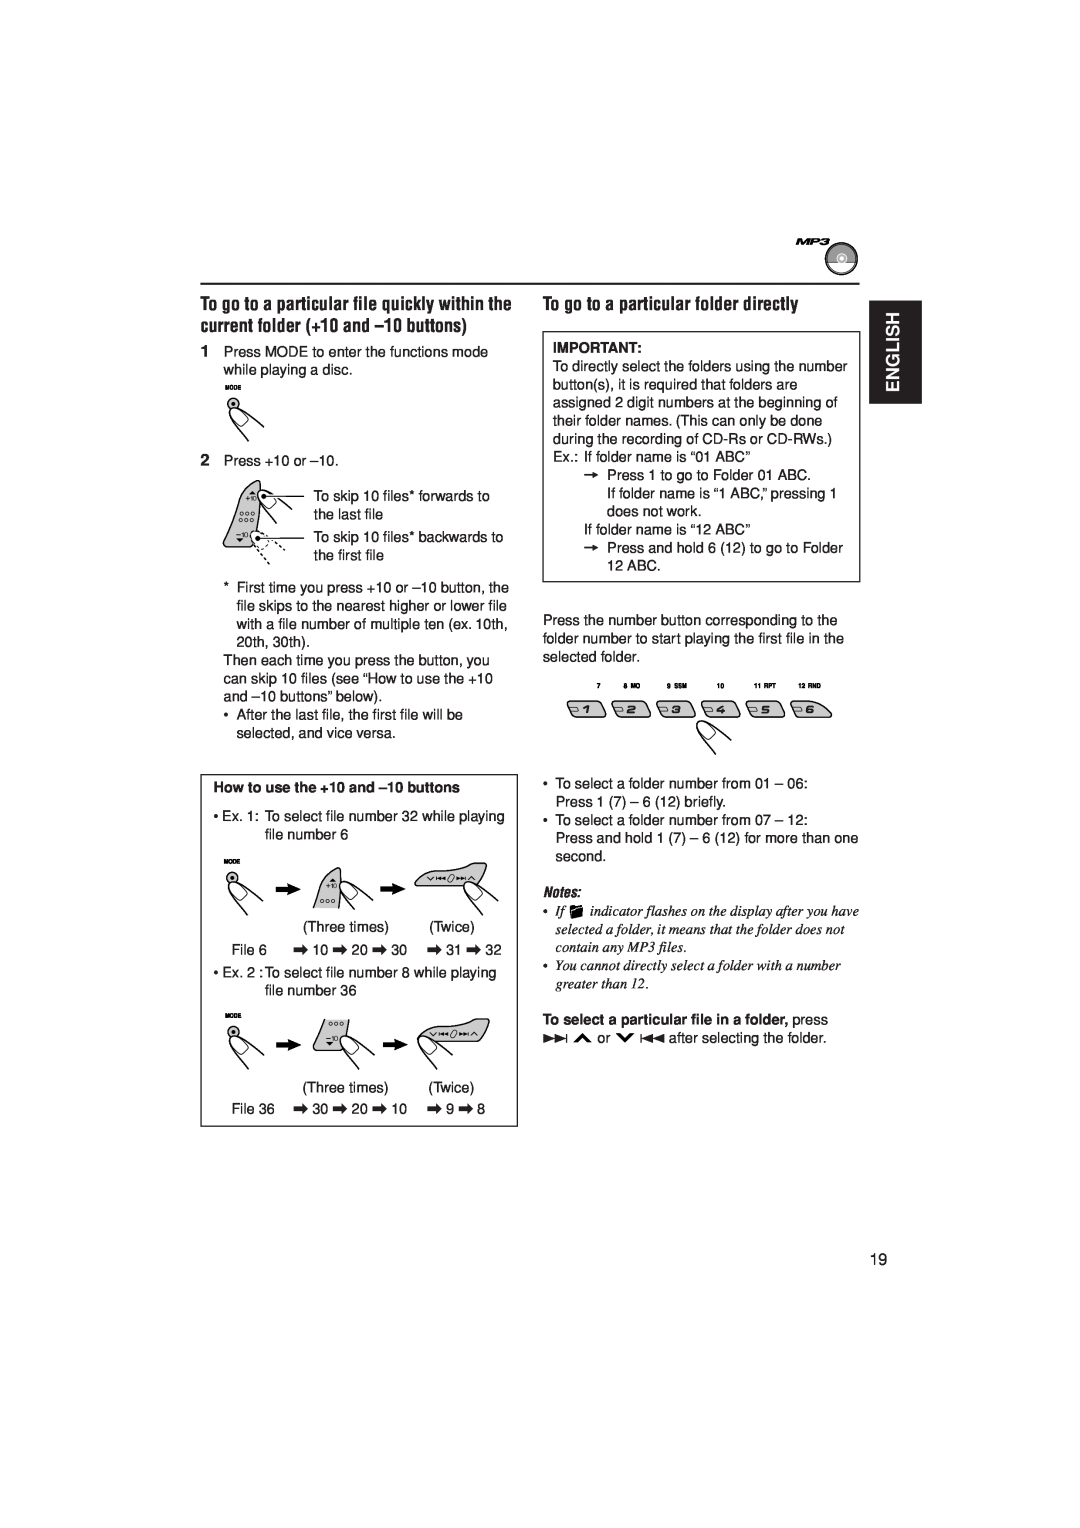 JVC KD-G407 manual To go to a particular folder directly, English, How to use the +10 and -10buttons 